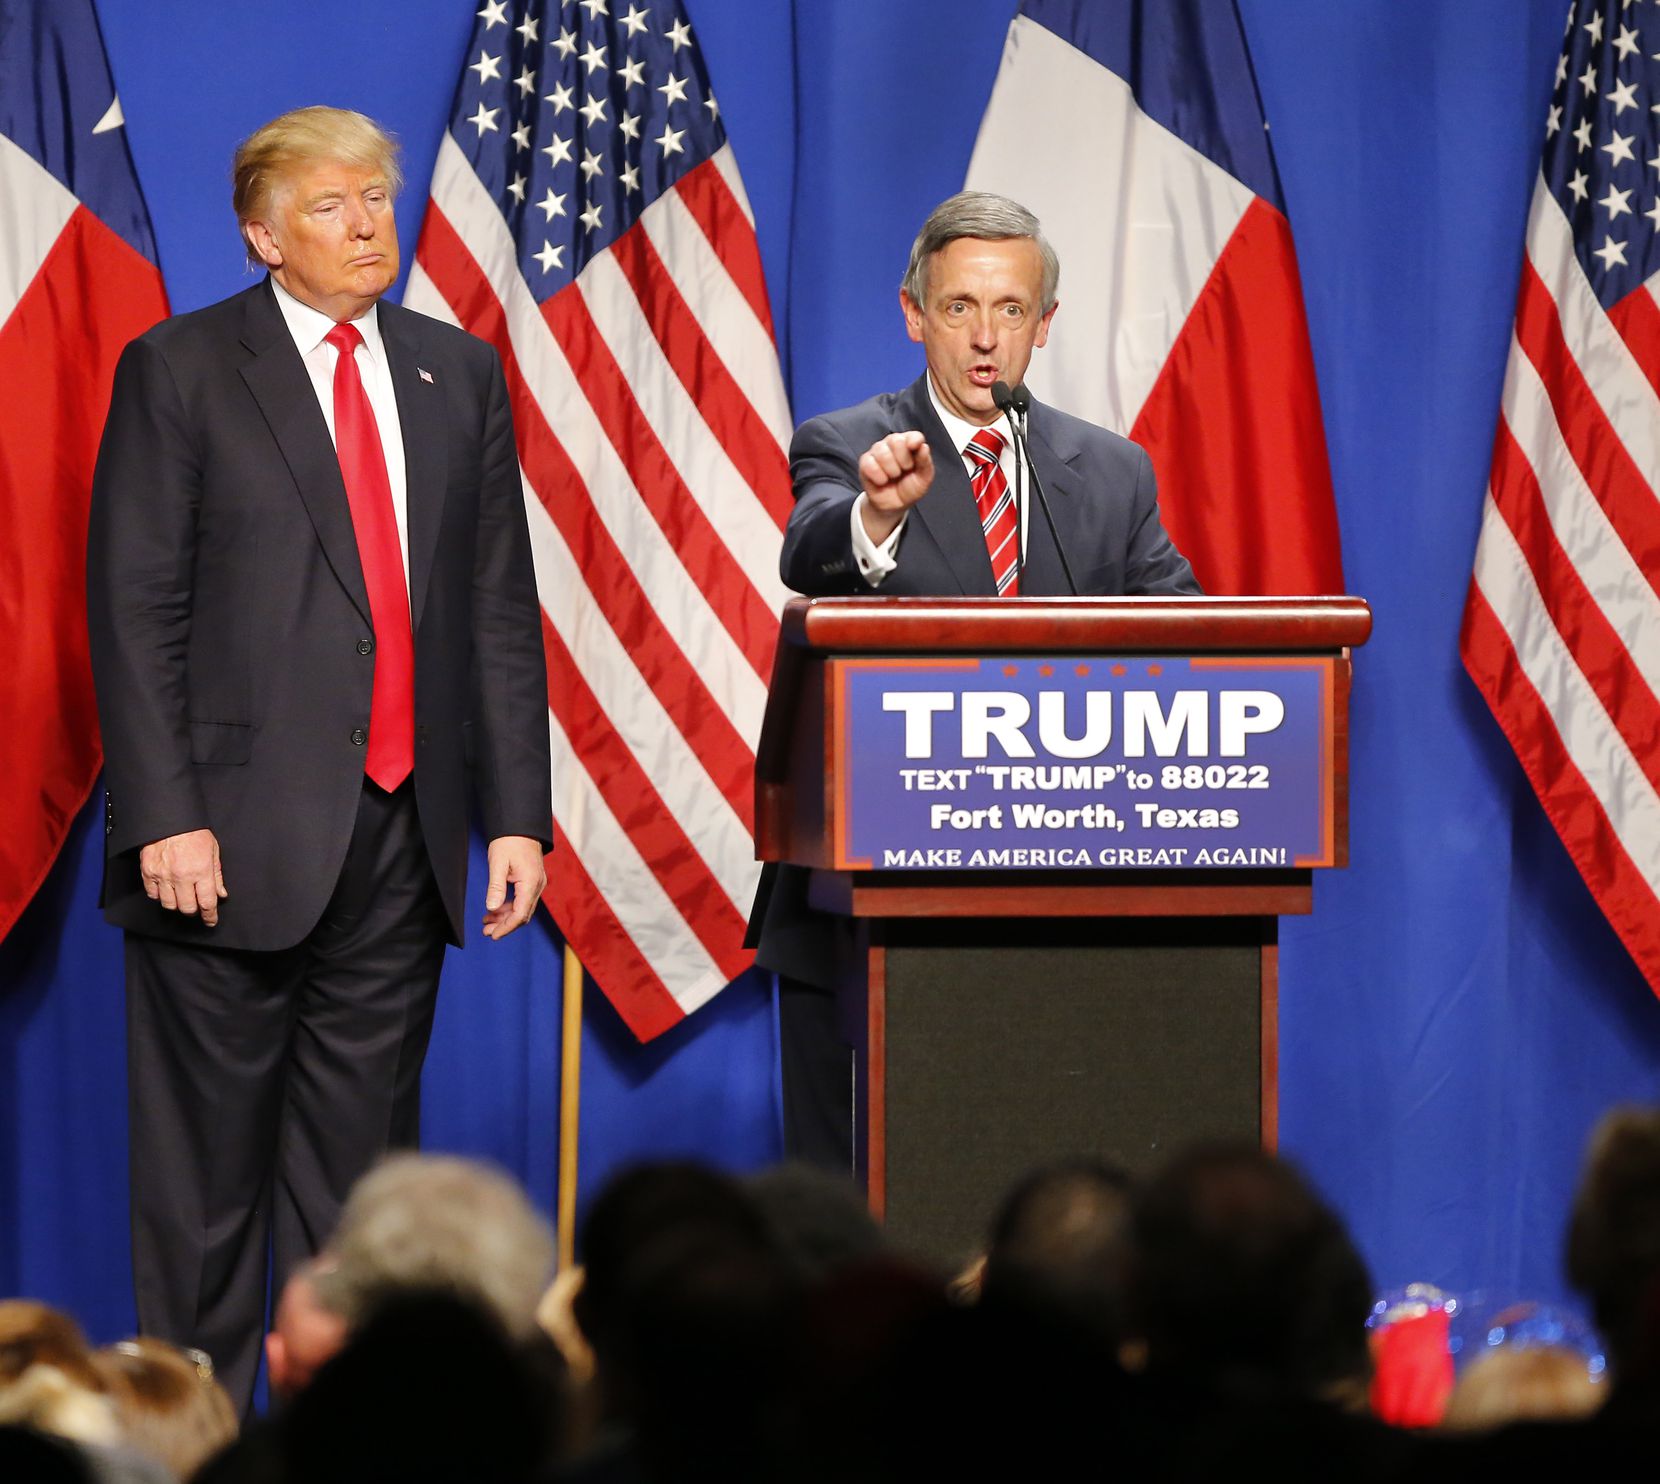 Robert Jeffress, pastor of First Baptist Church in Dallas, speaks at a Trump rally in Fort Worth in February.